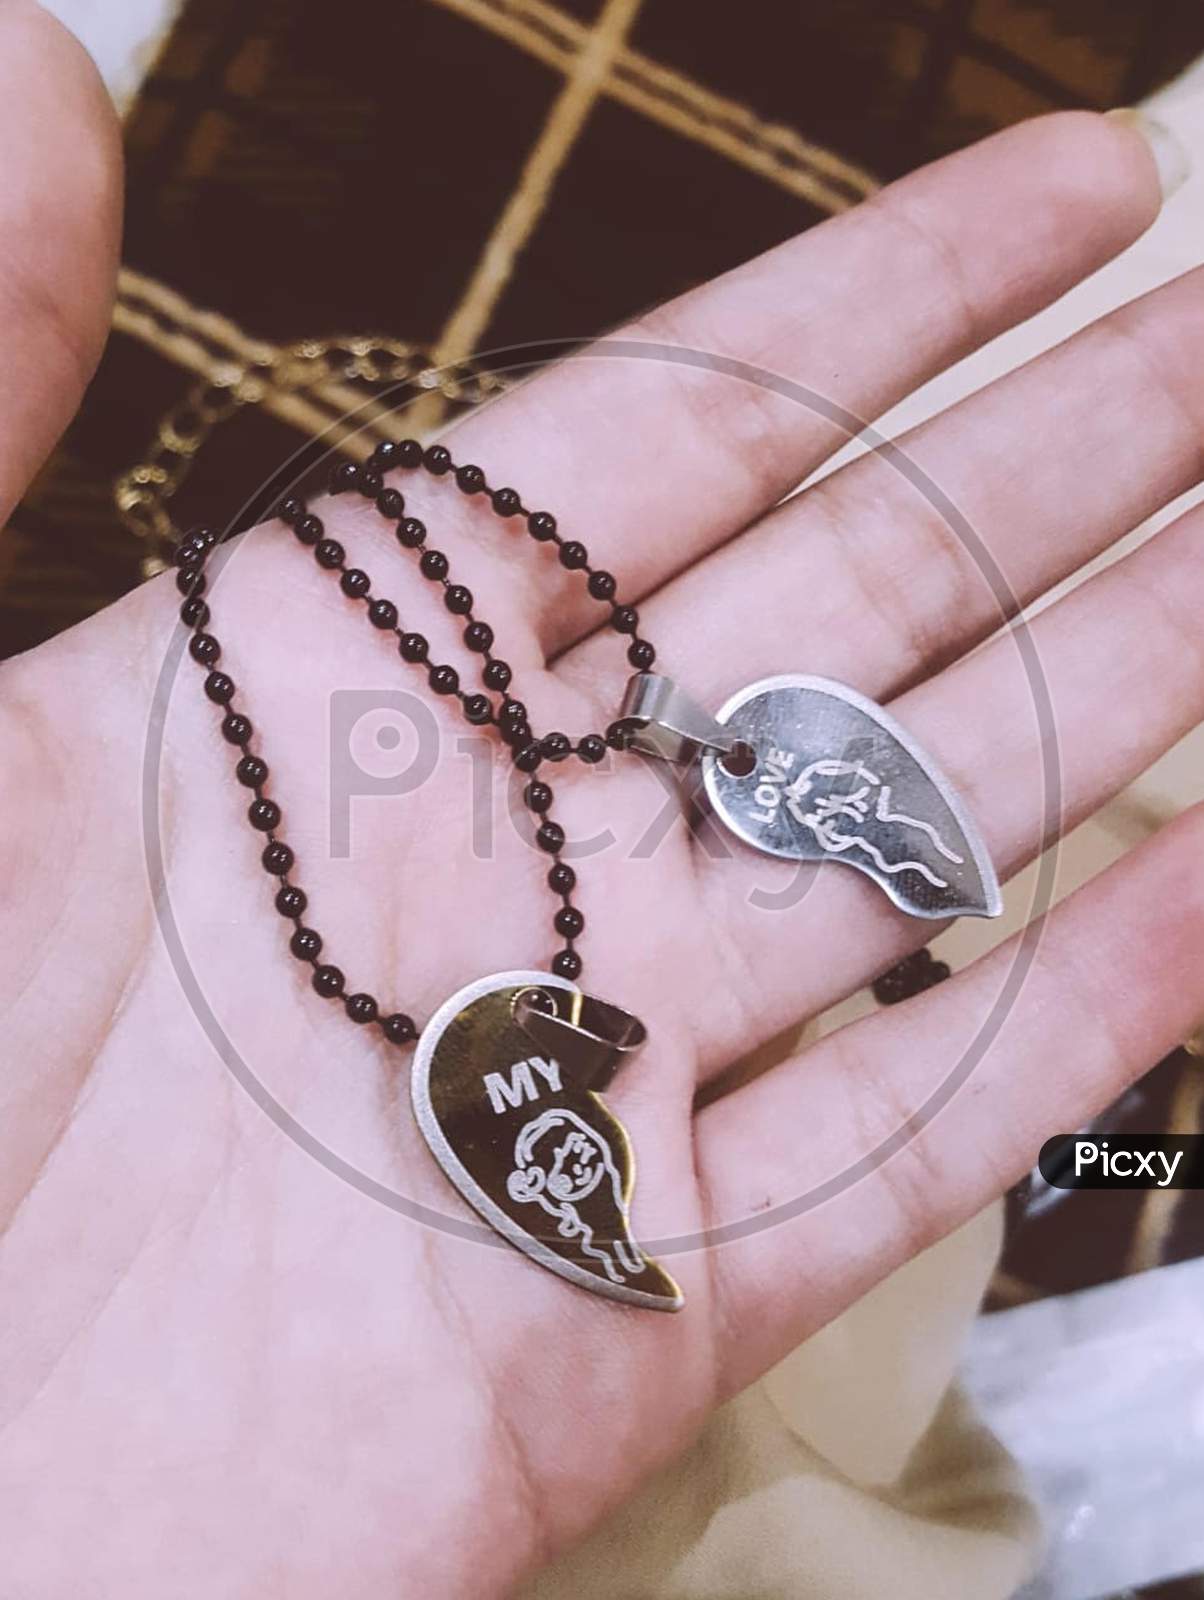 My Love two necklaces of heart with black chain in someone's hand